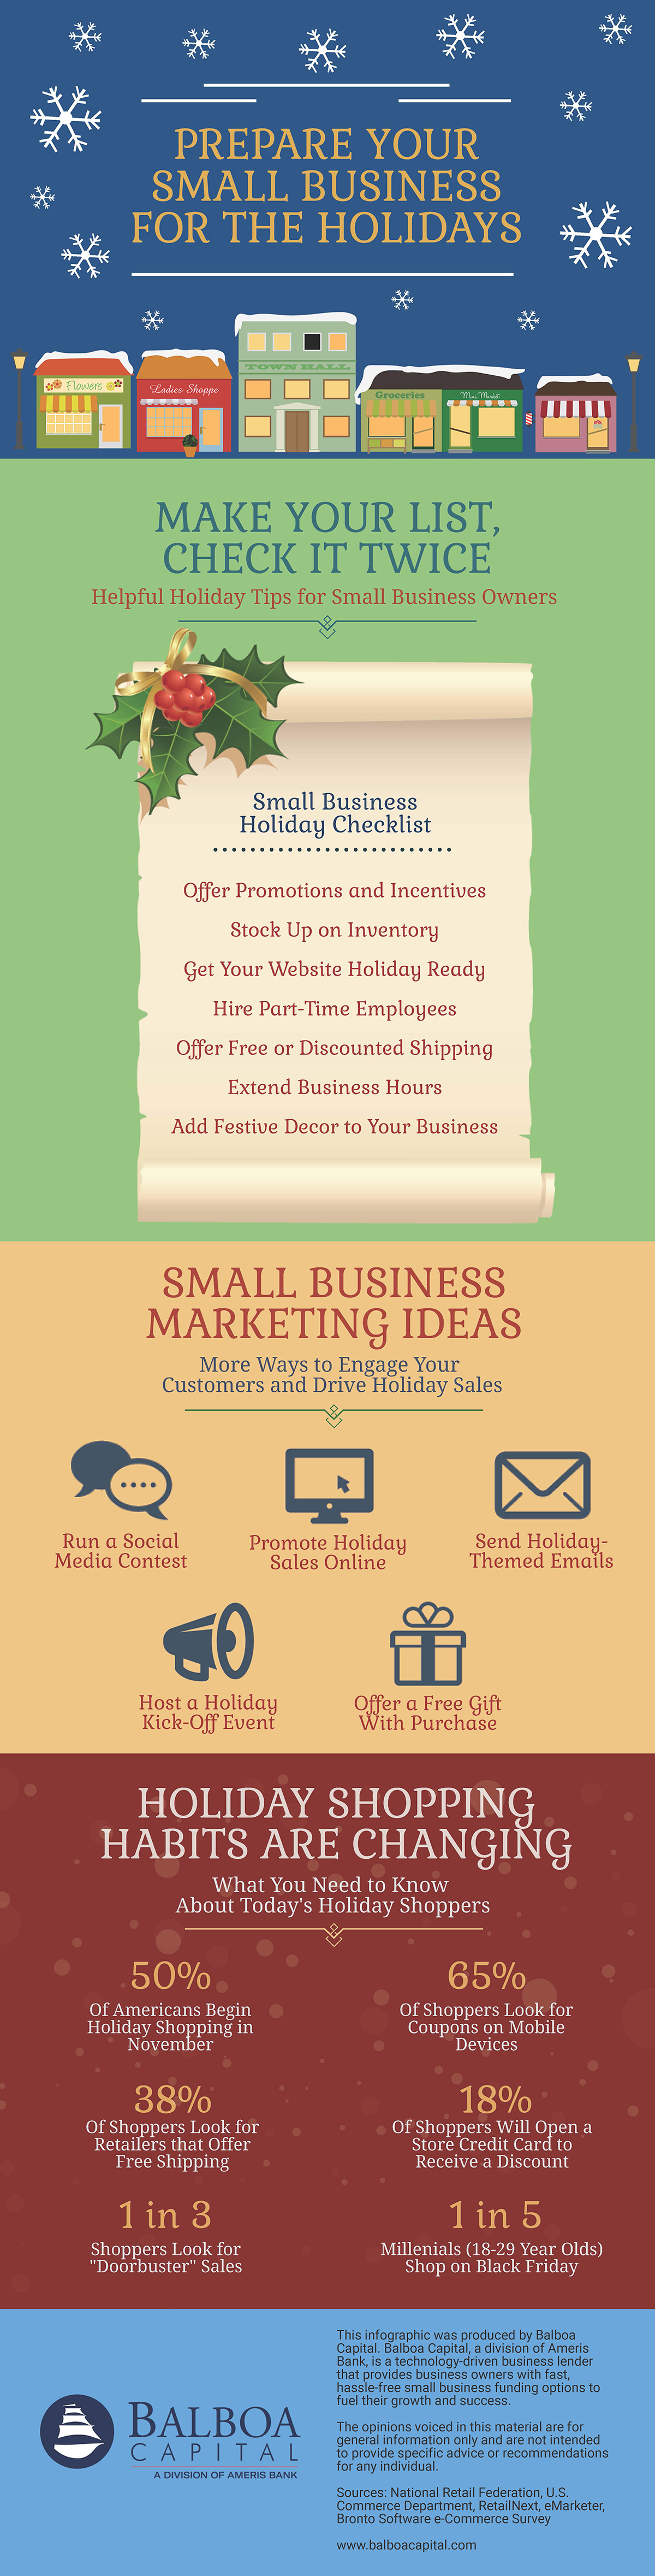 Holiday Business Planning Infographic